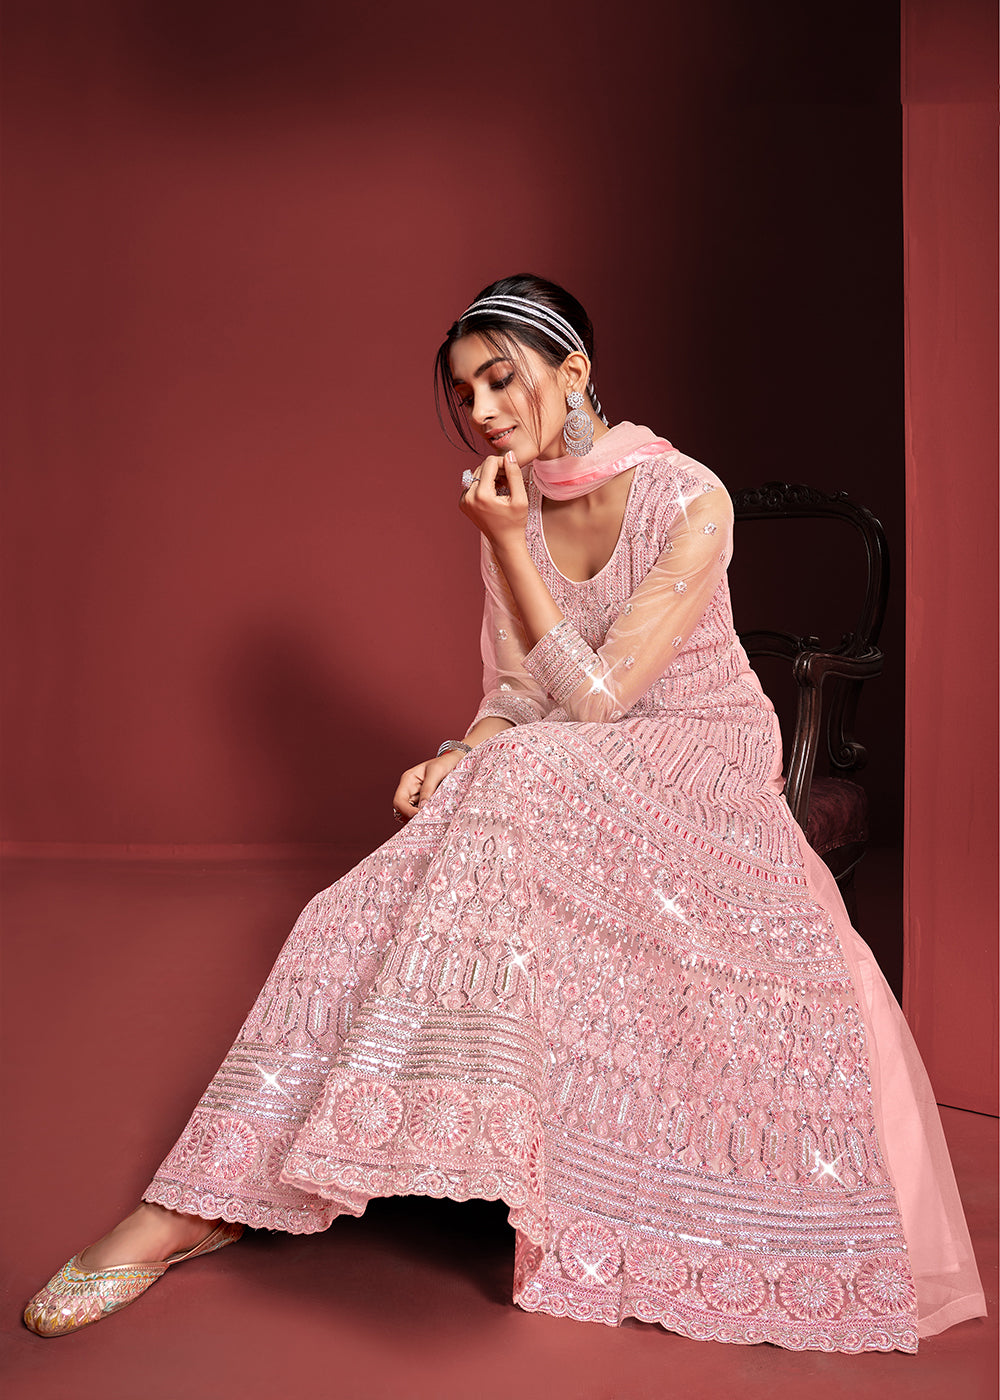 Buy Now Festive Party Style Soft Pink Embroidered Net Anarkali Gown Online in USA, UK, Australia, New Zealand, Canada, Italy & Worldwide at Empress Clothing.